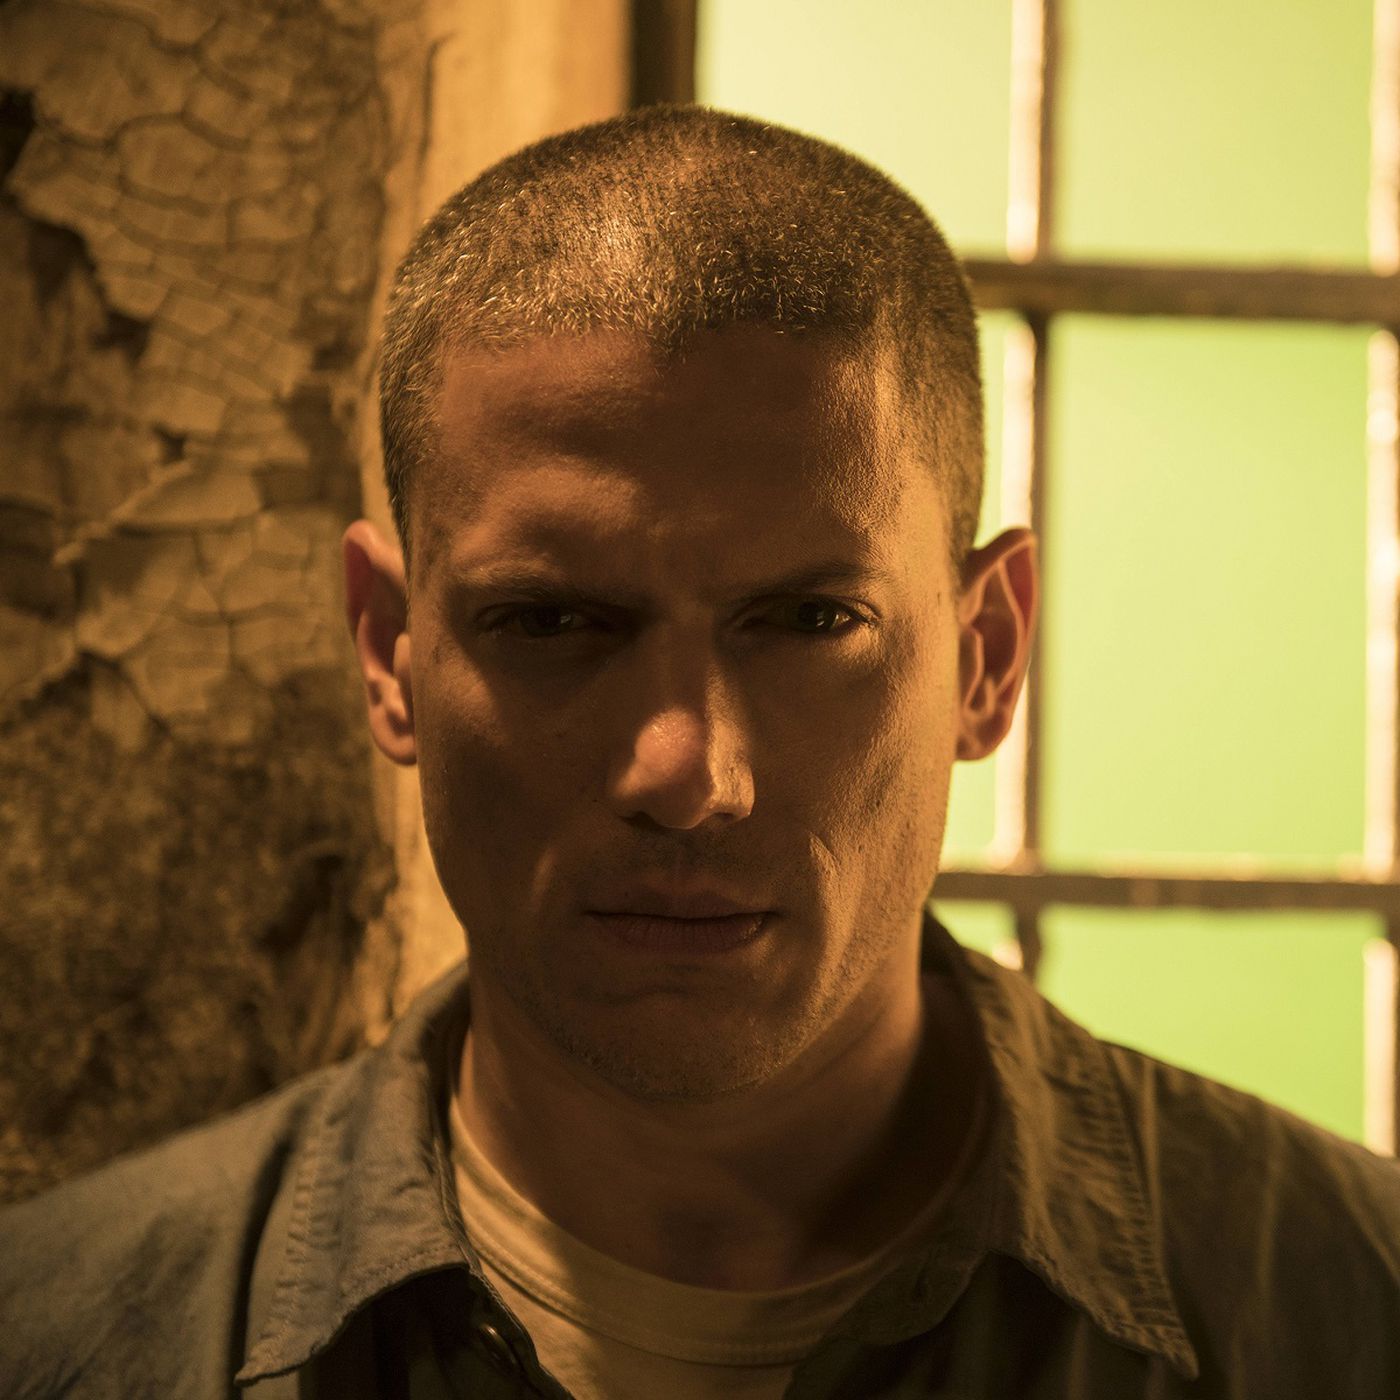 Prison Break used to be dumb but kinda fun. Its new miniseries is shockingly offensive